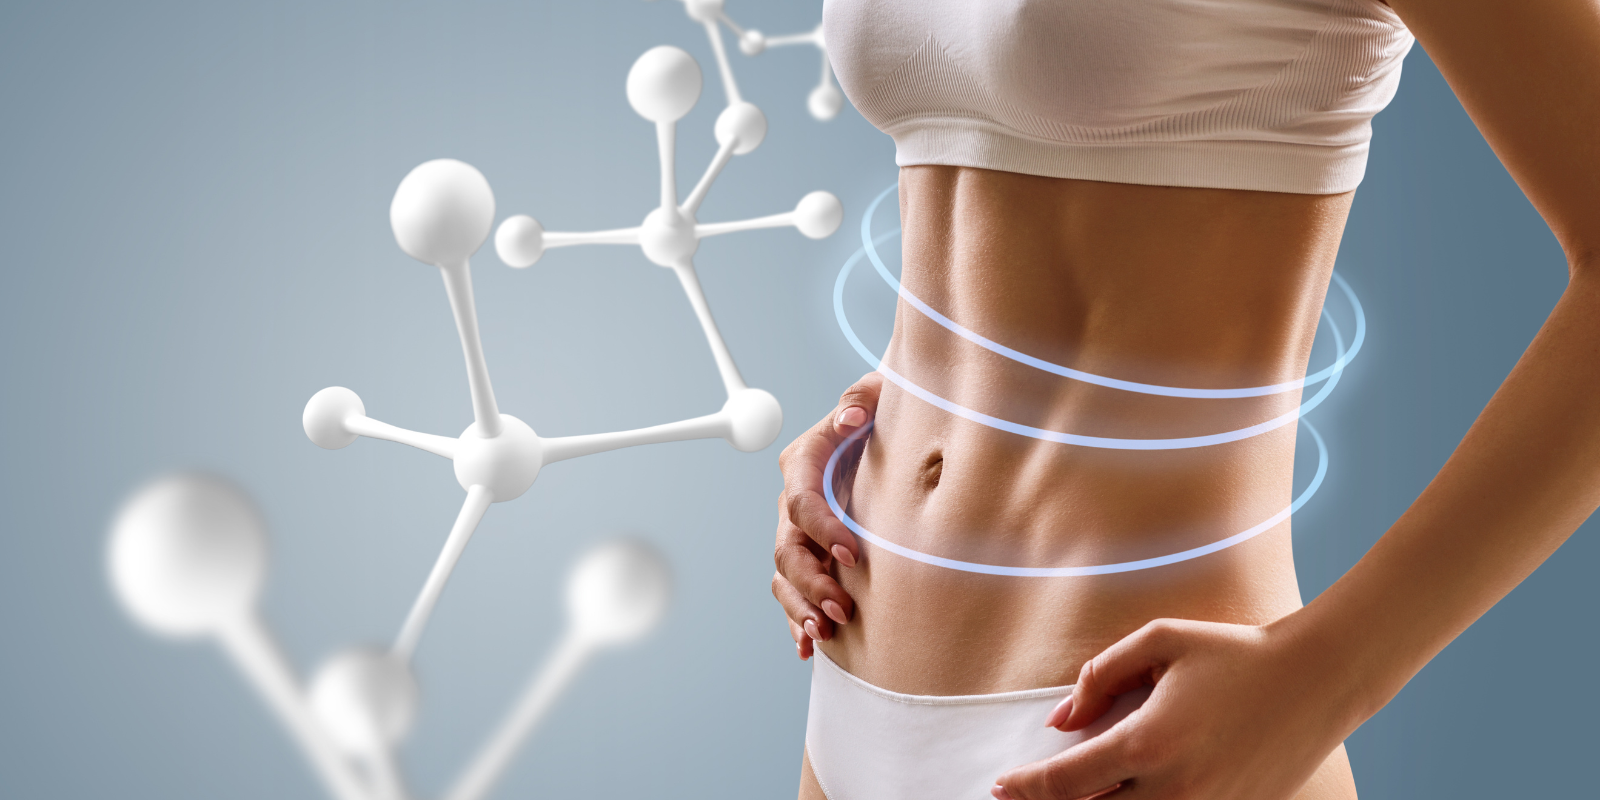 A molecule wraps around a fit woman's body representing metabolism